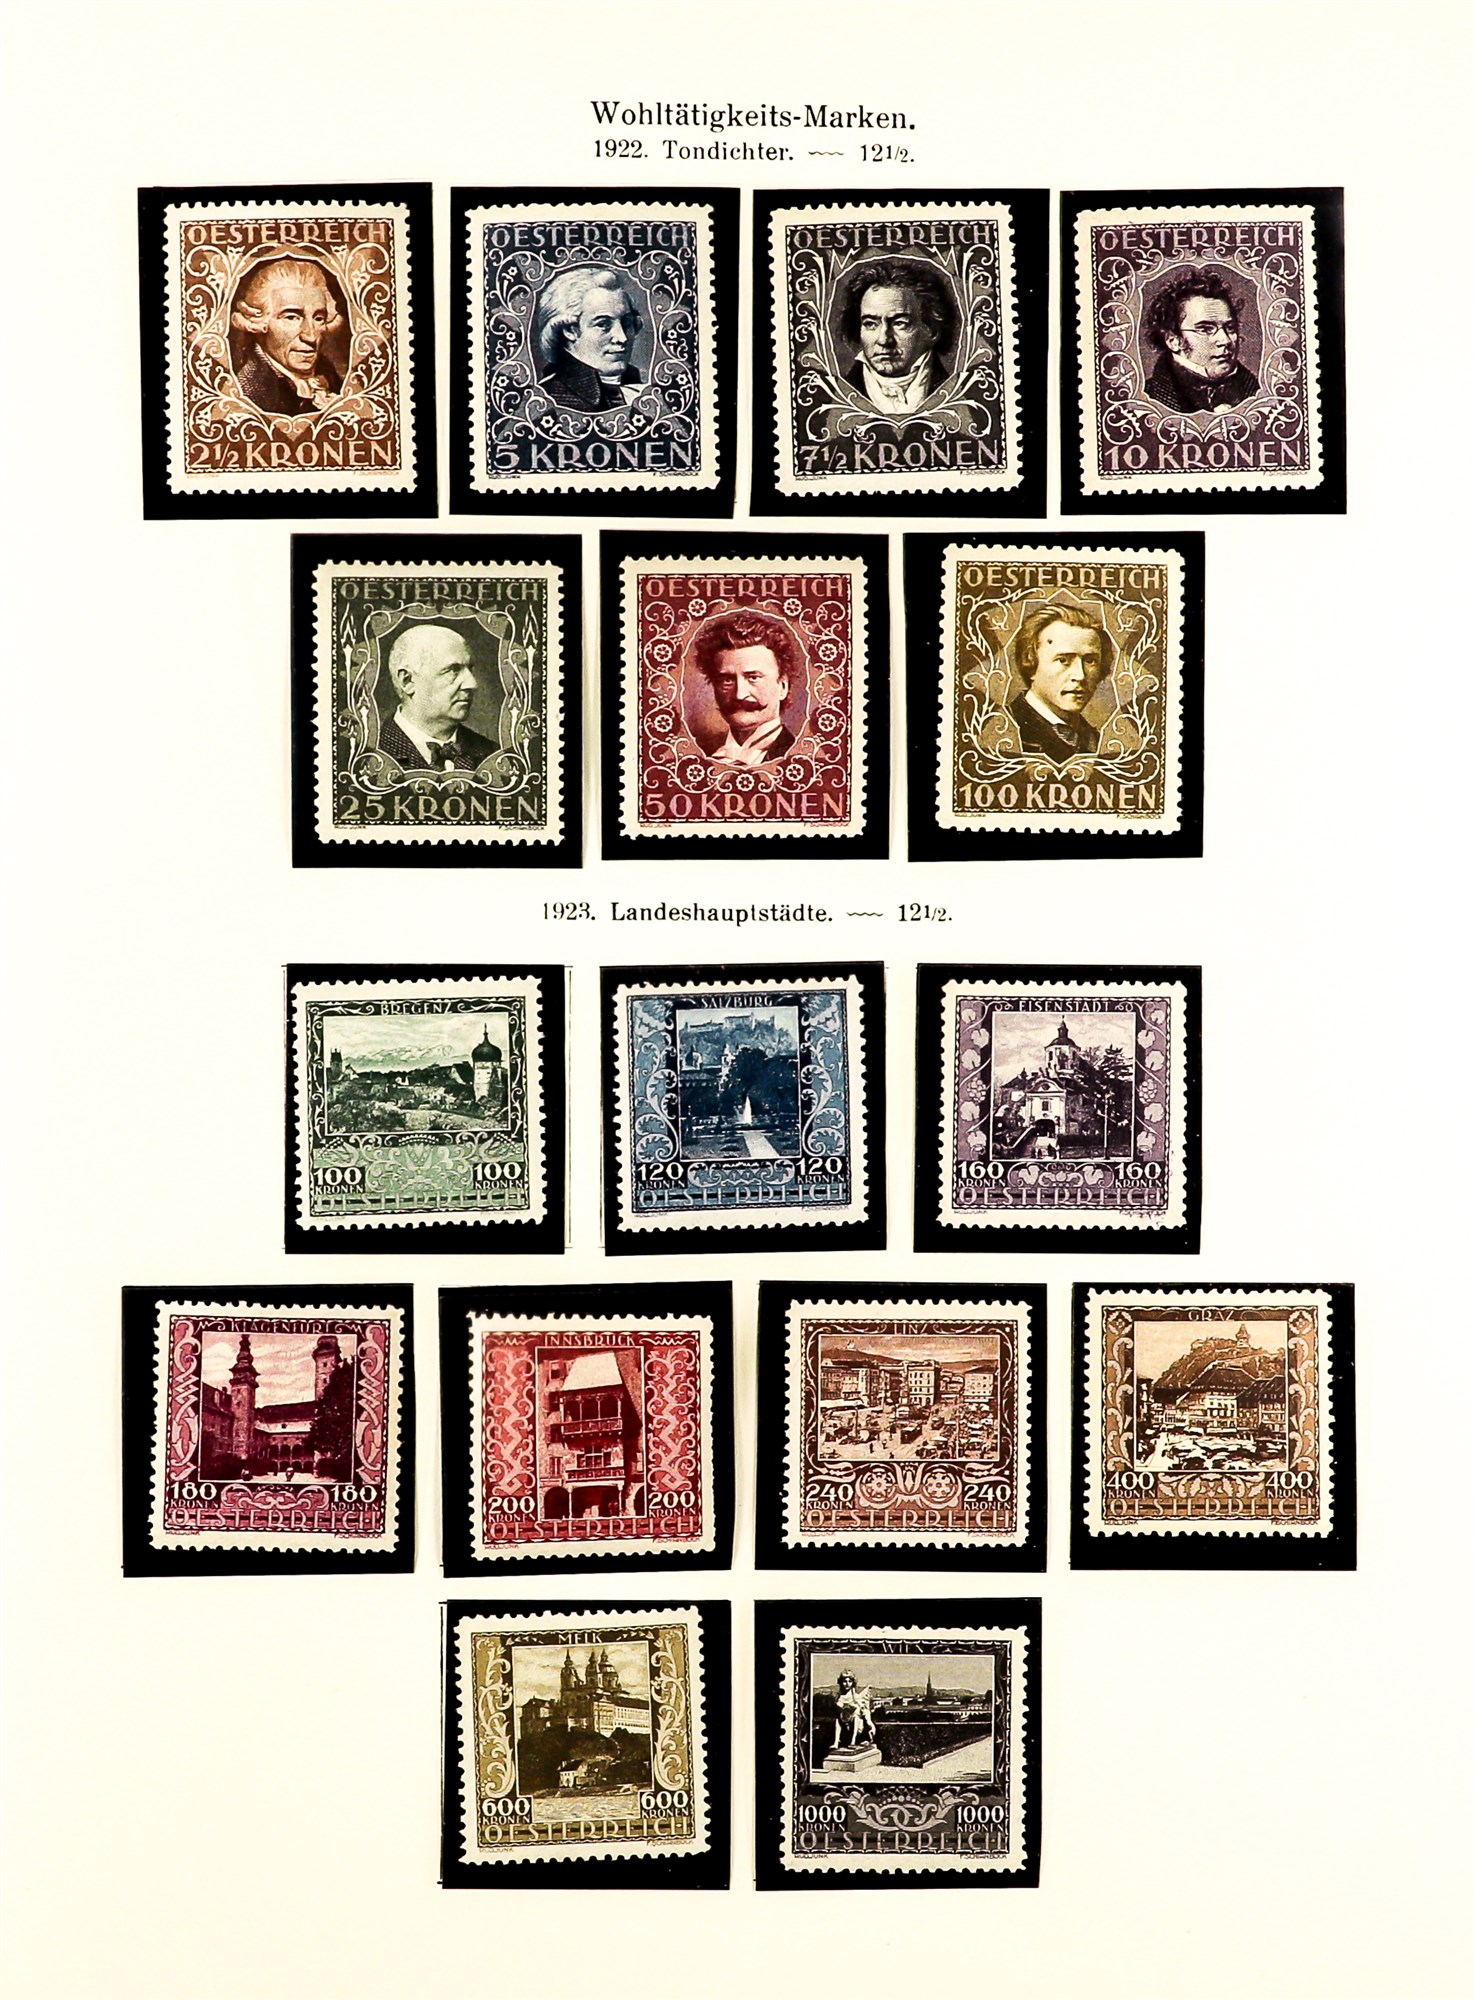 AUSTRIA 1918 - 1937 REPUBLIC COLLECTION of chiefly mint / never hinged mint sets in album incl